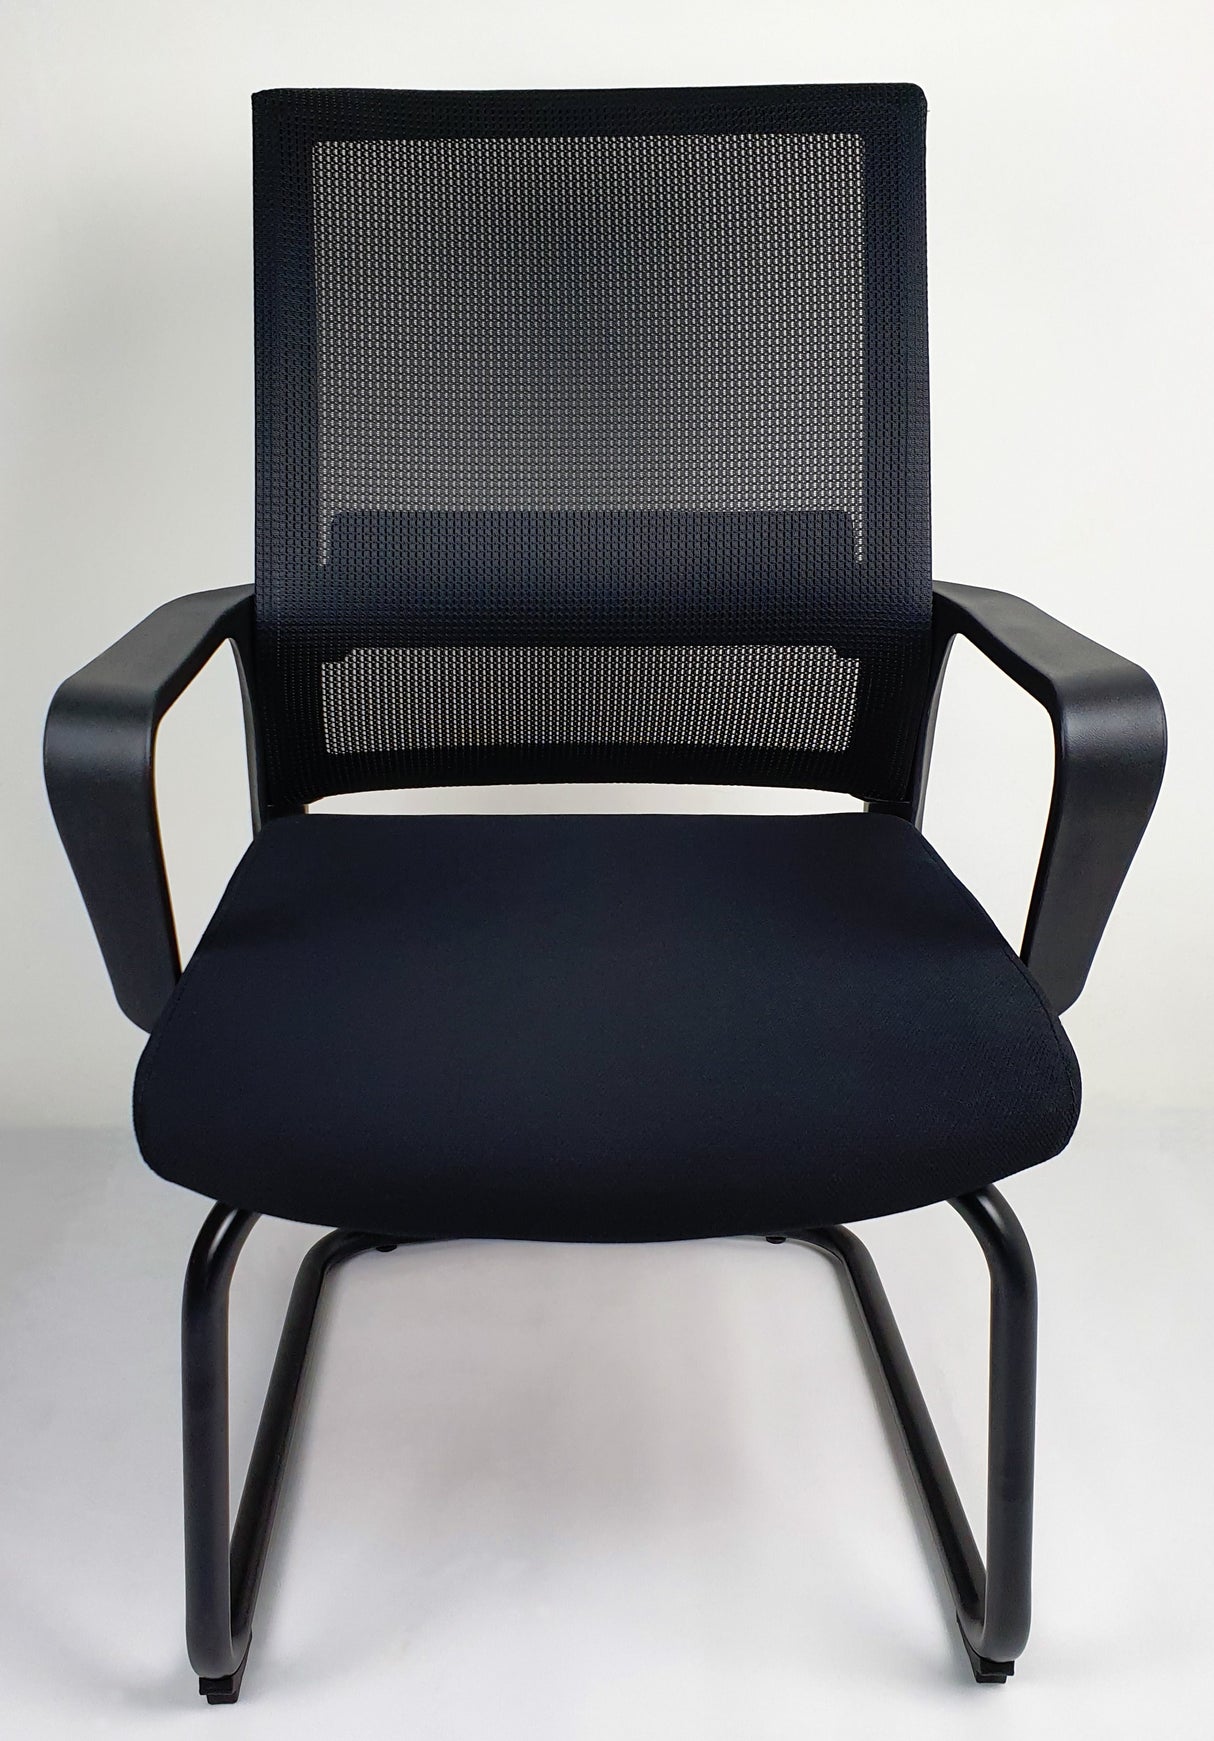 Mesh Back Office Visitor Chair - Sold in Packs of Two - CHA-HB-307C